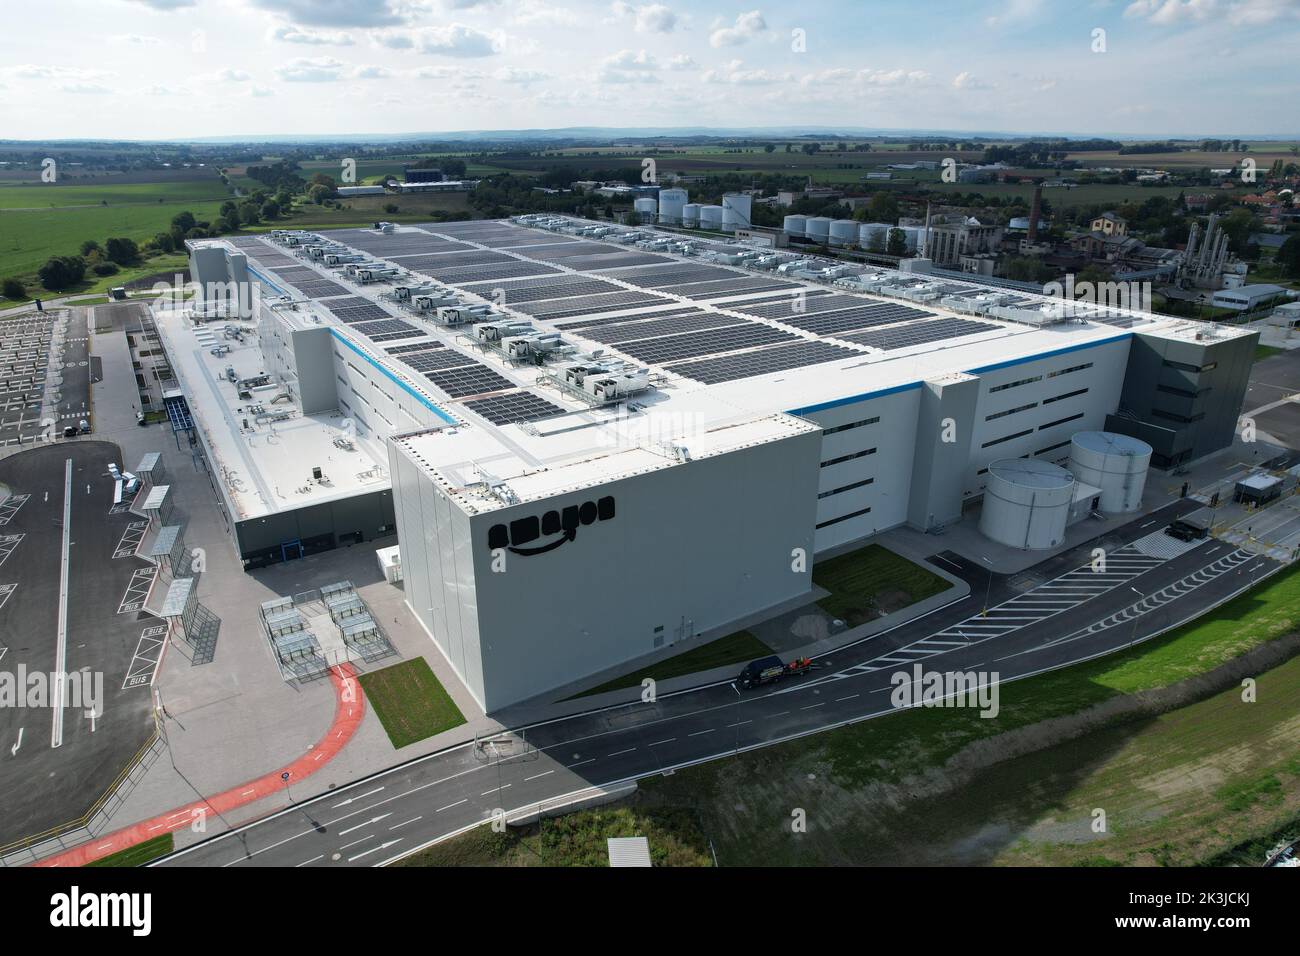 Brand new Amazon Warehouse distribution center. Aerial view of massive sort and distribute logistics center,Eur Amazon warehouse,Kojetin Czech solar p Stock Photo